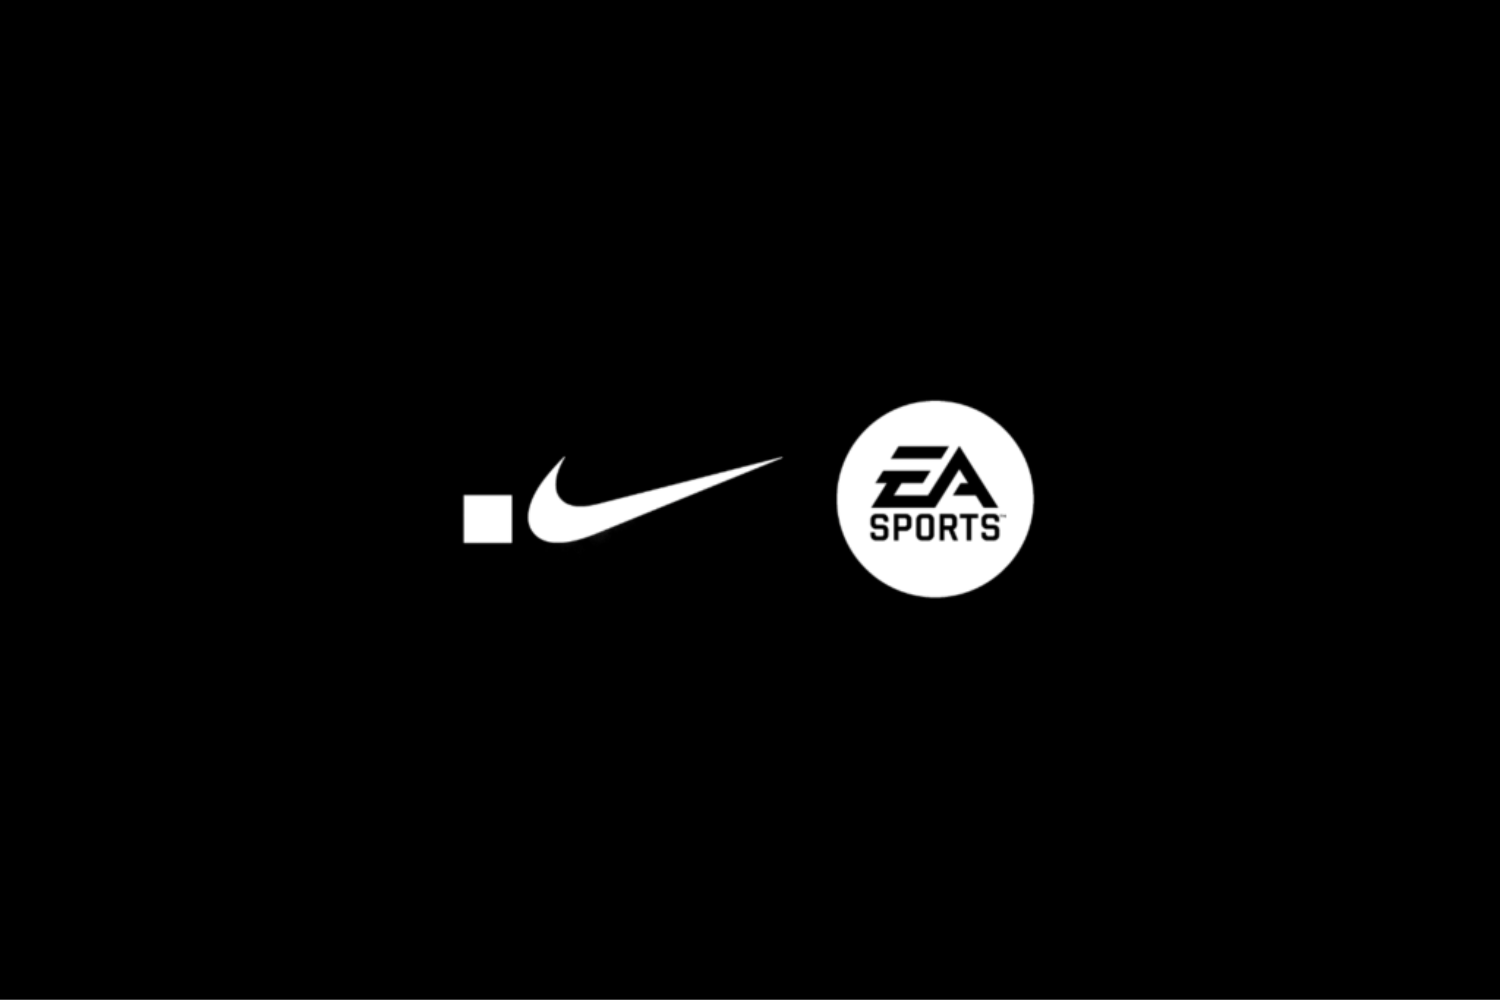 Nike and EA are collaborating to integrate .SWOOSH virtually into EA SPORTS